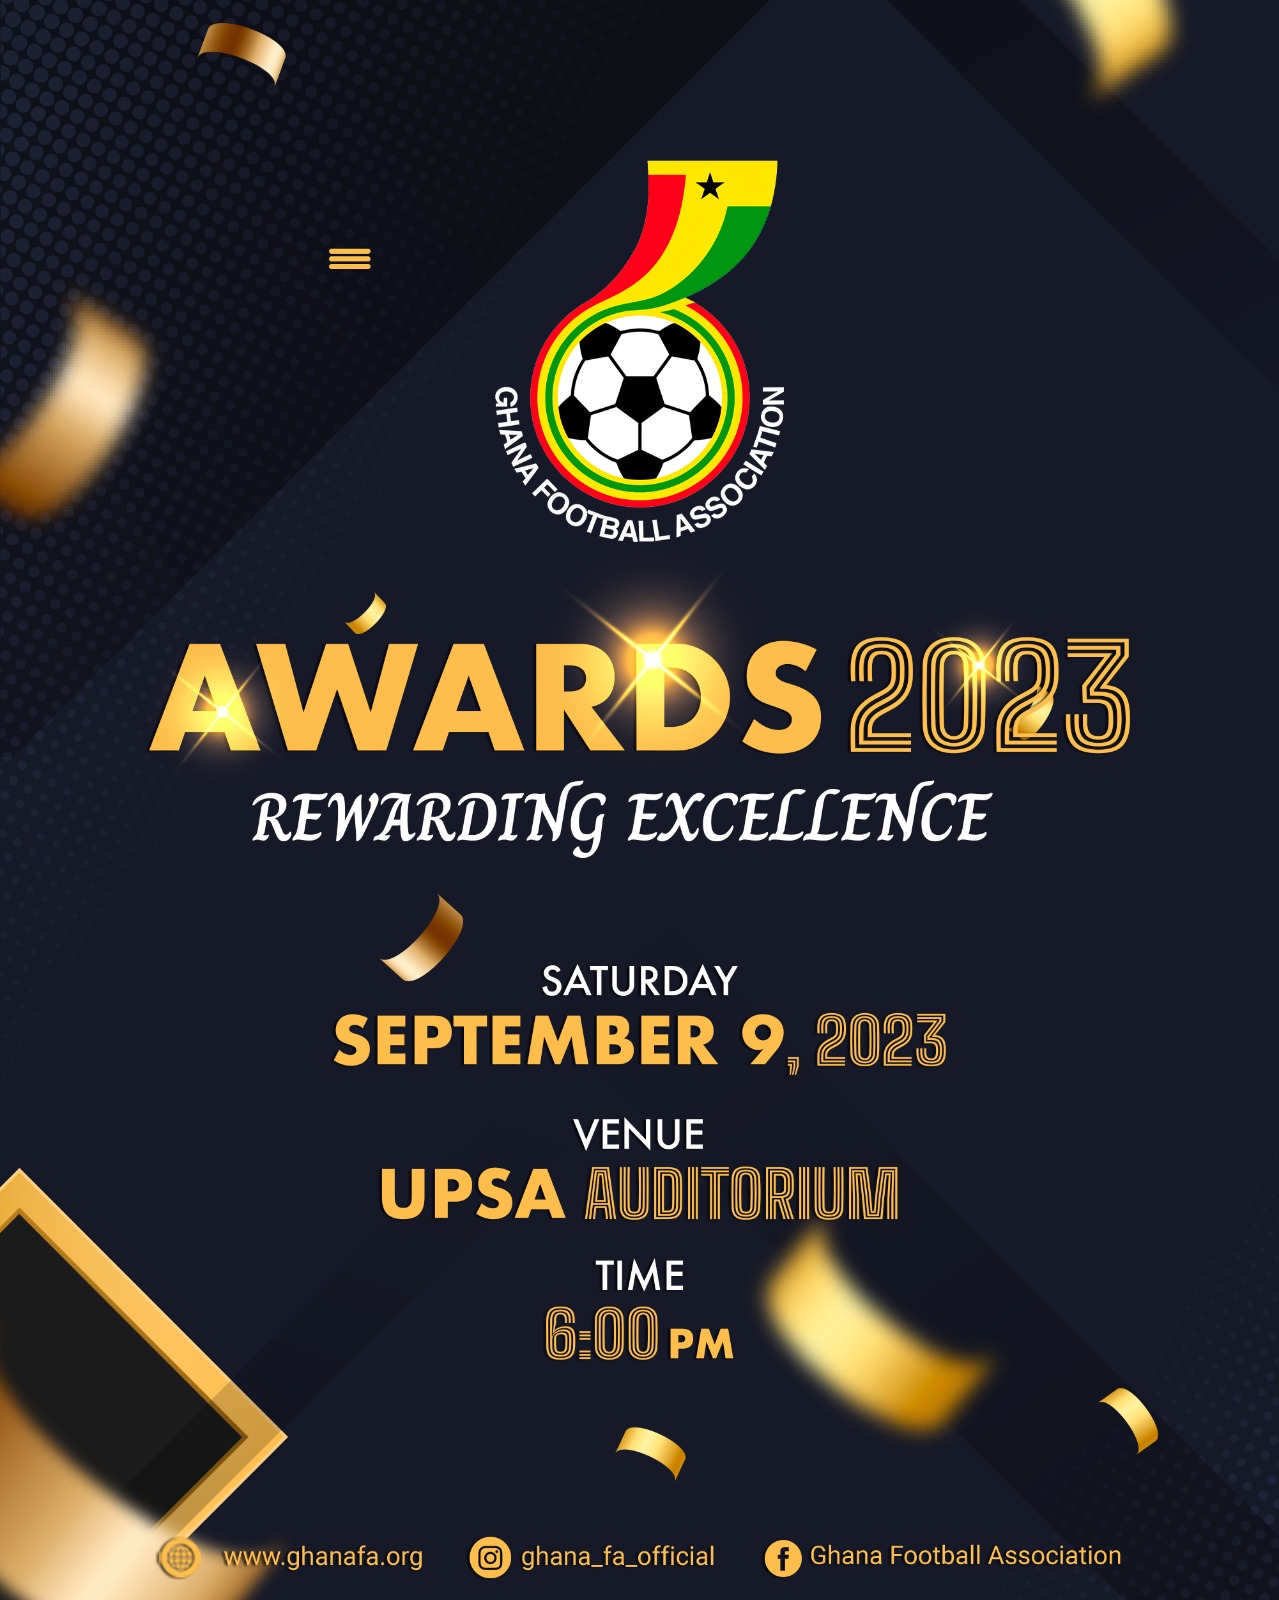 GFA end of season awards scheduled for Saturday September 9